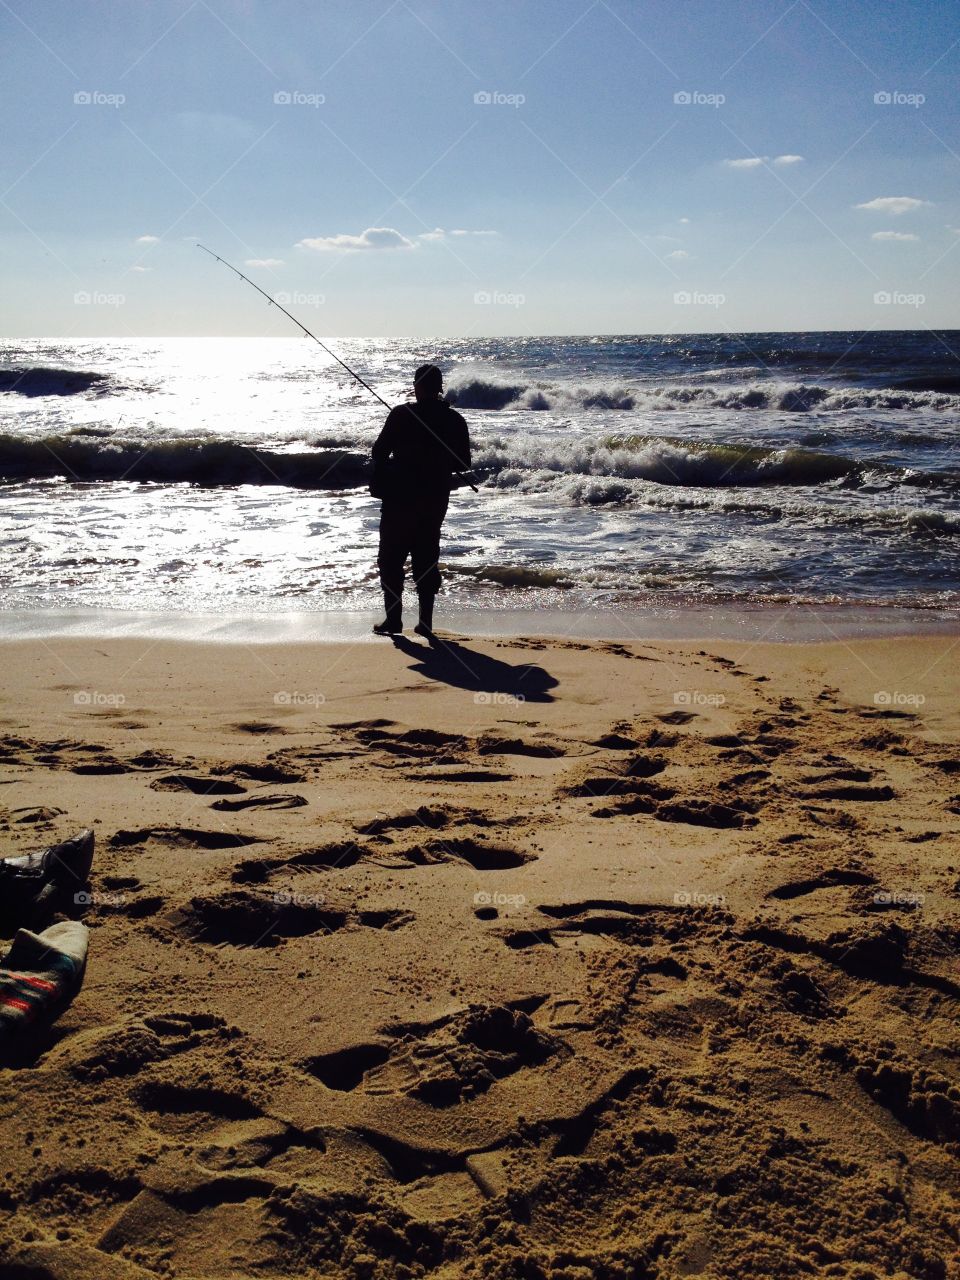 Fisherman. Only man on the beach fishing